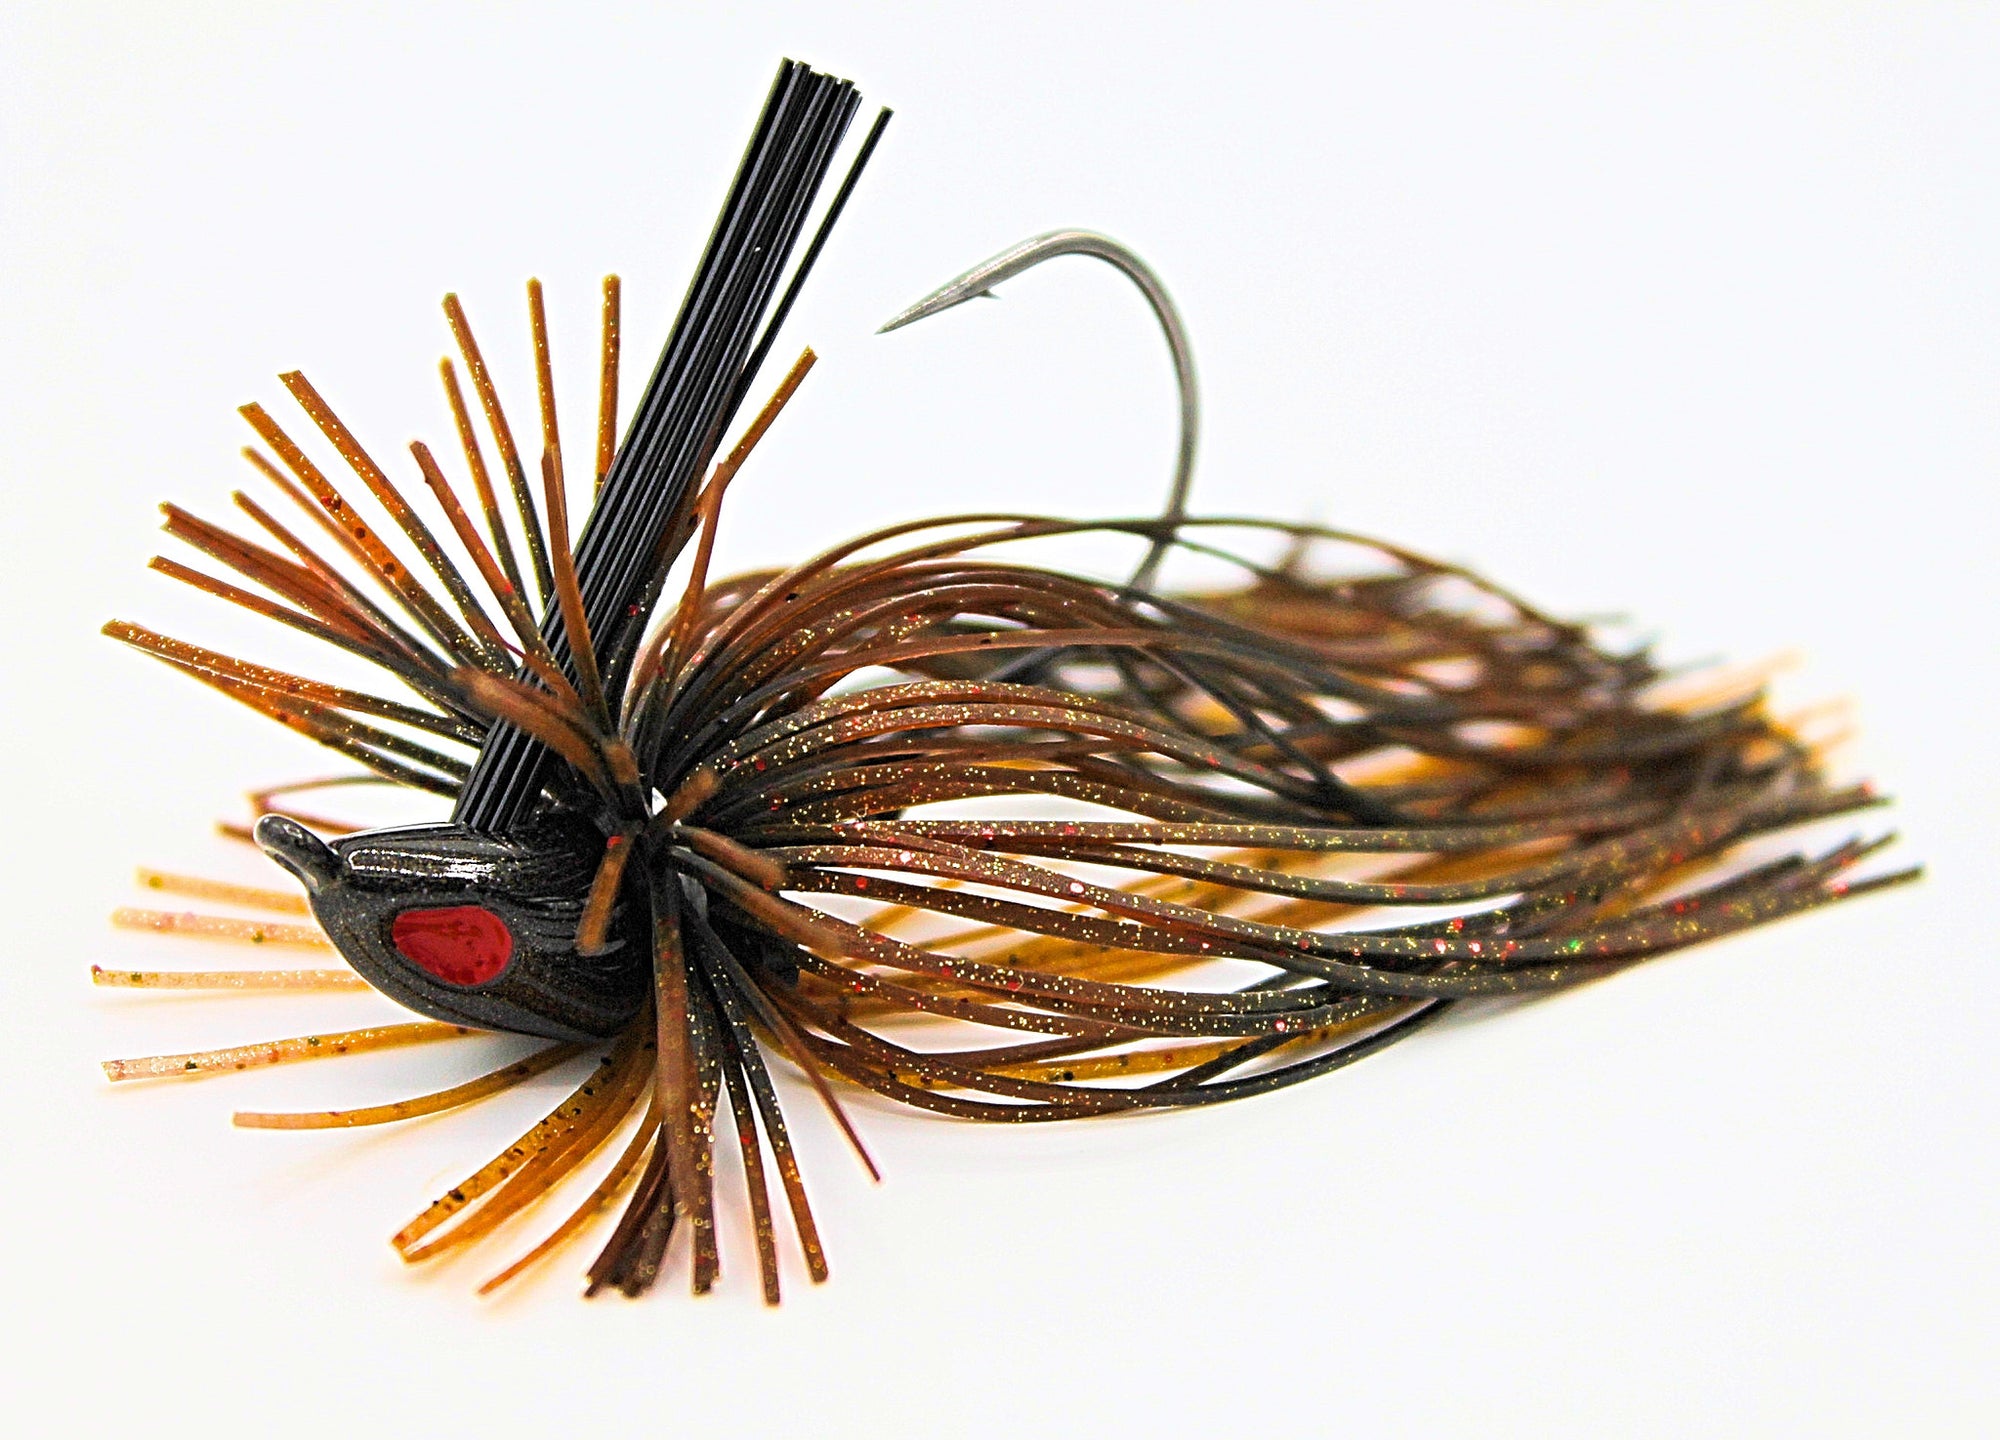 Omega Finesse Pitching Jig